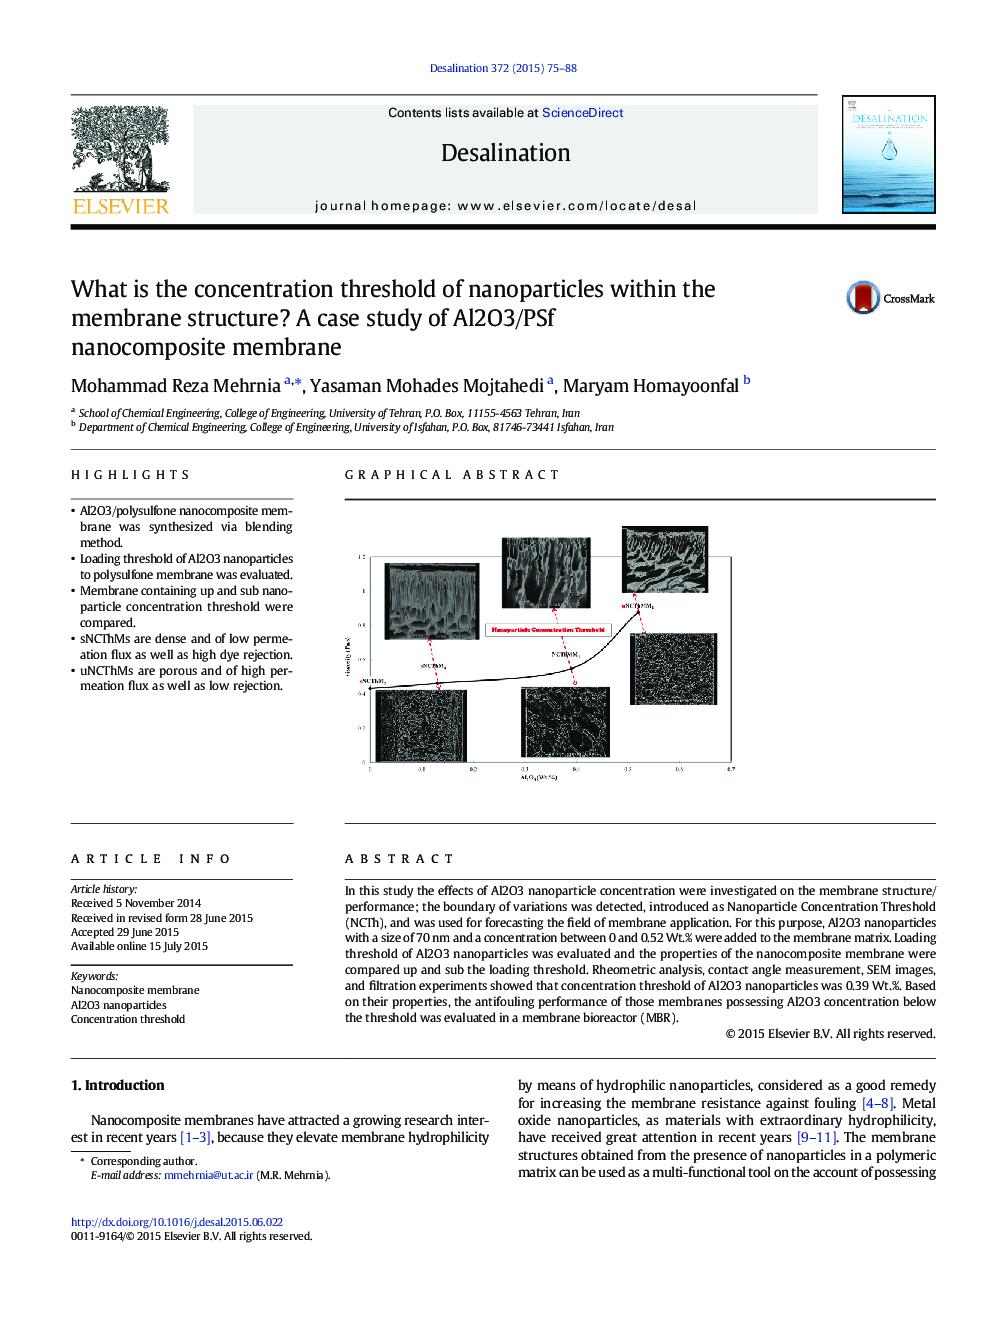 What is the concentration threshold of nanoparticles within the membrane structure? A case study of Al2O3/PSf nanocomposite membrane